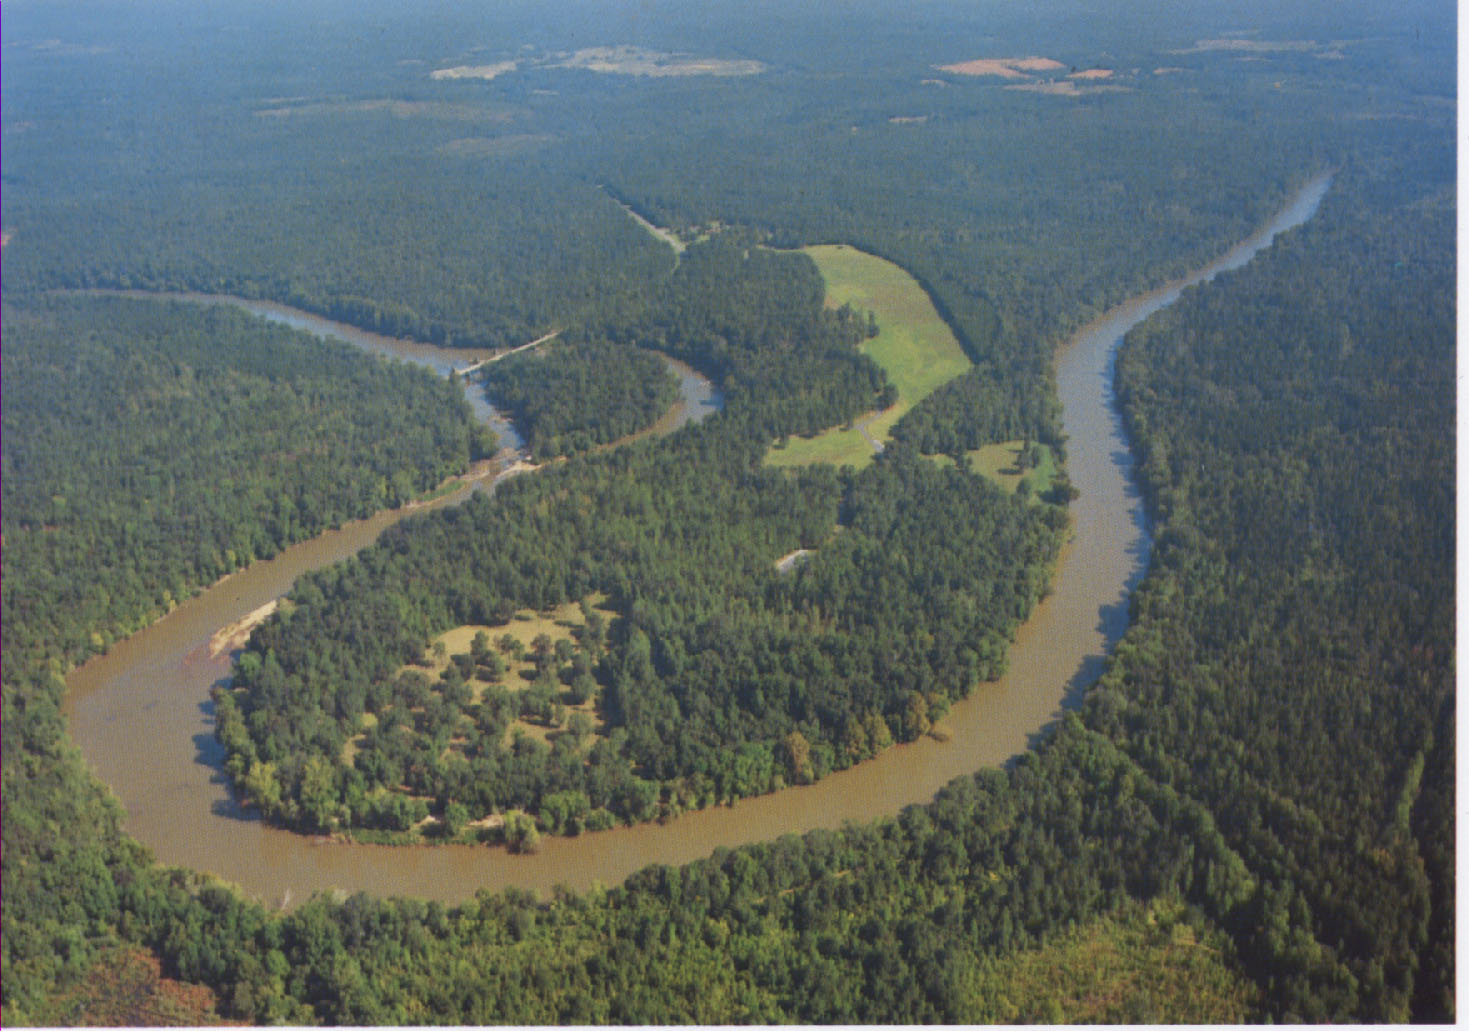 Aerial view of the horseshoe-shaped bend of the Tallapoosa River